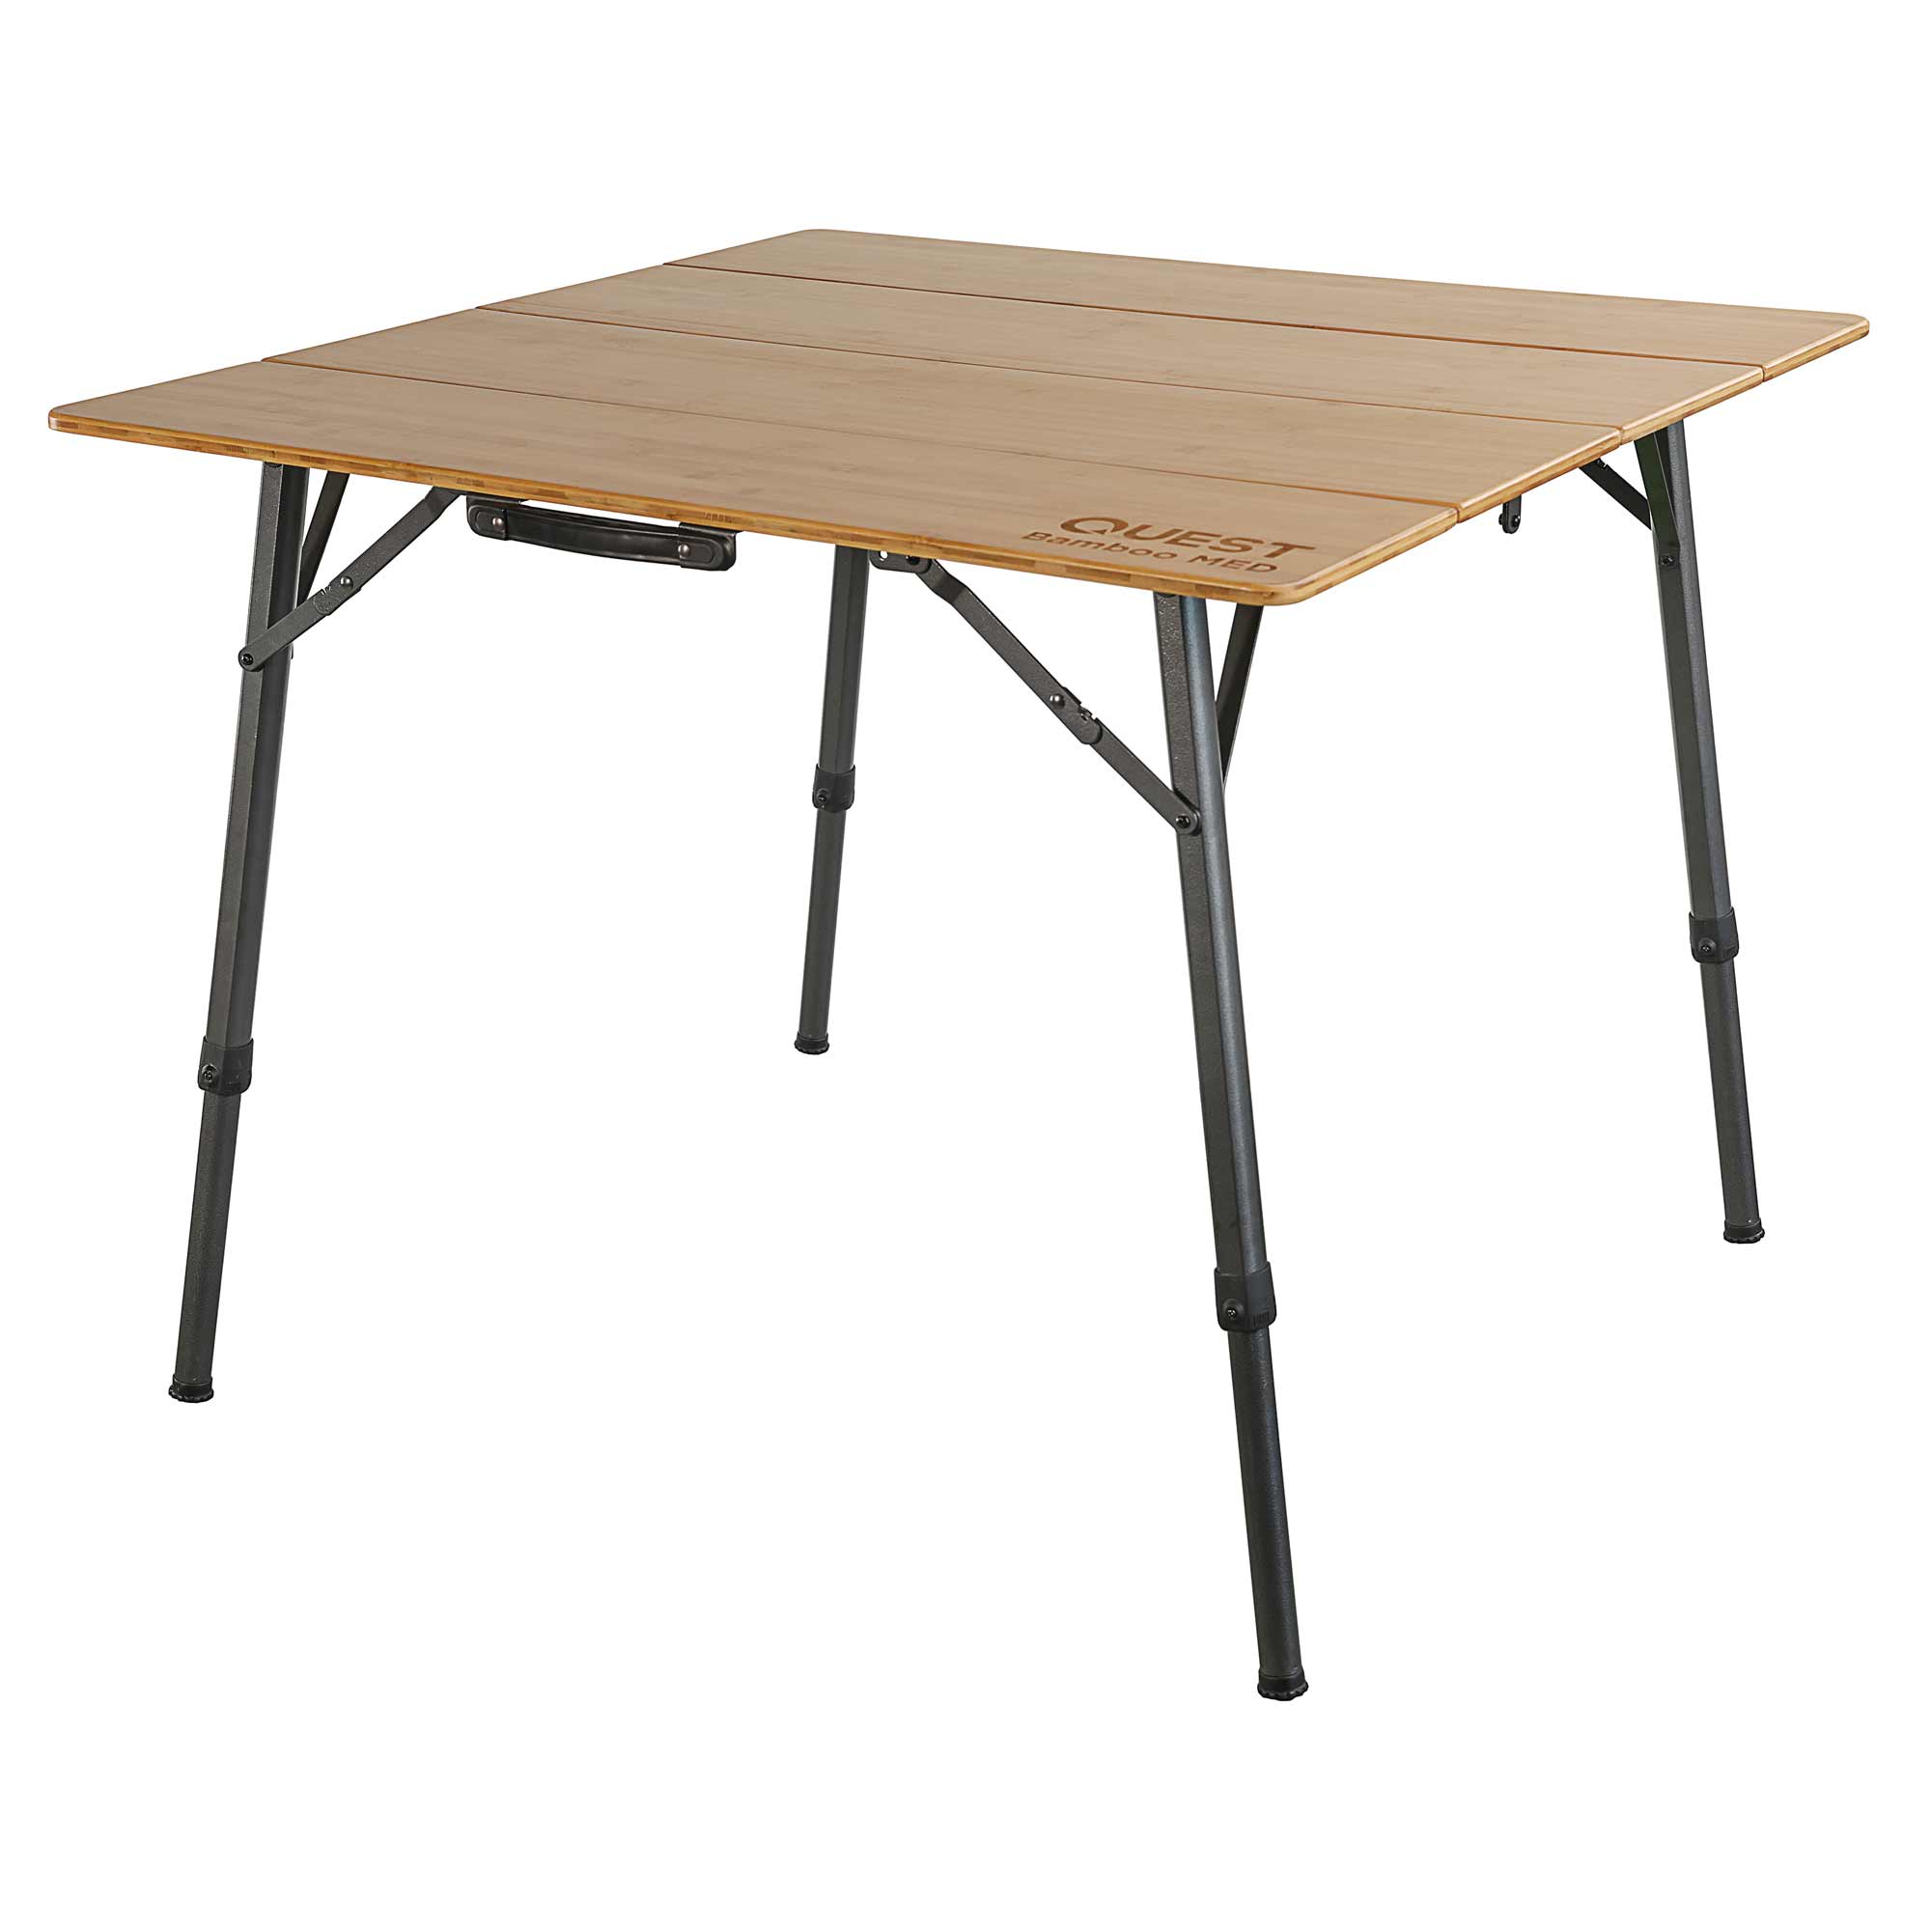 Quest Outdoors Bamboo Square Table Medium